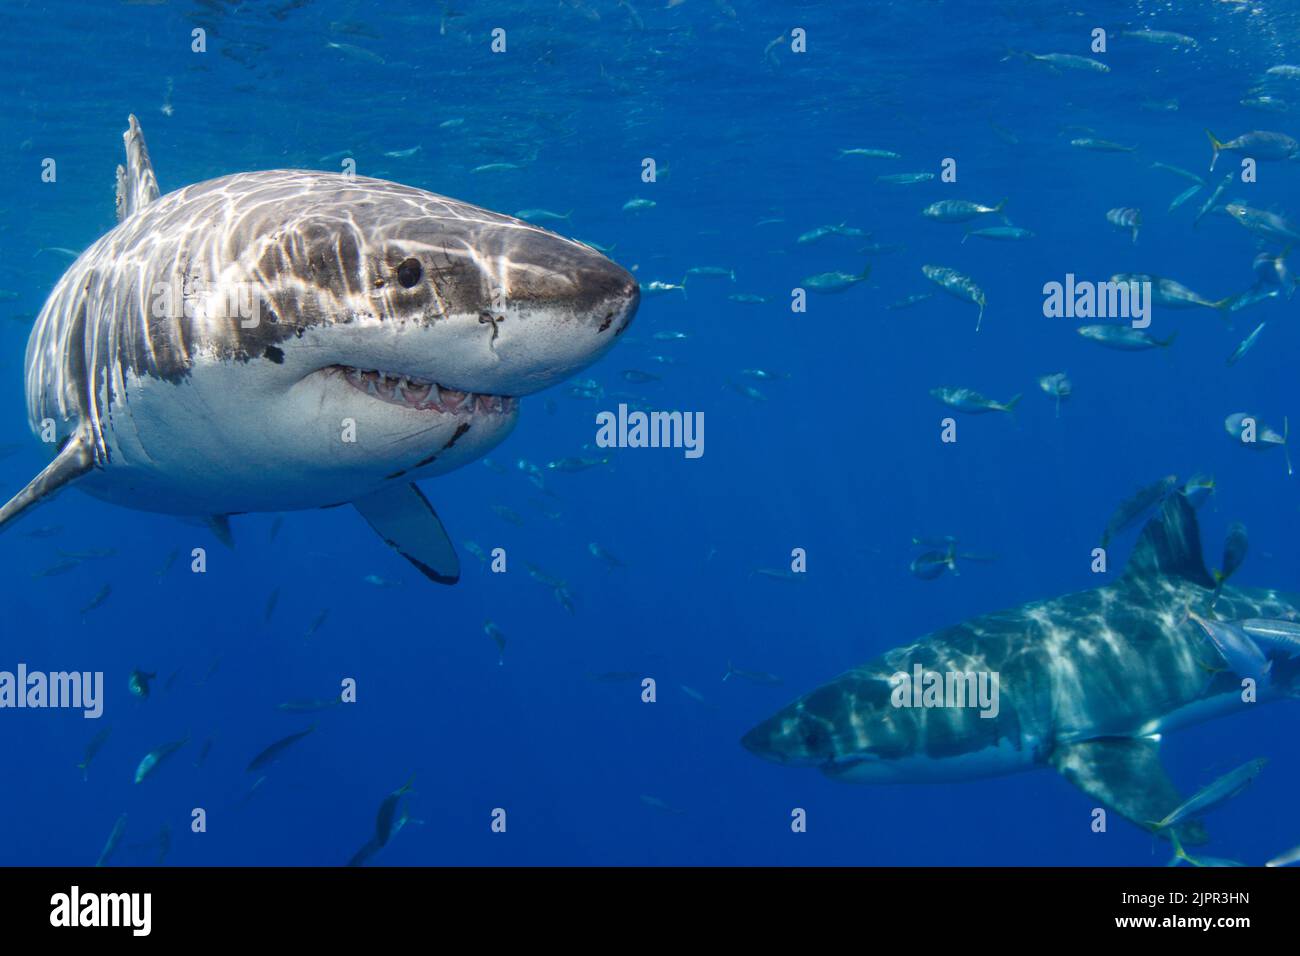 Two great white sharks, Carcharodon carcharias, photographed off Guadalupe Island, Mexico. Stock Photo